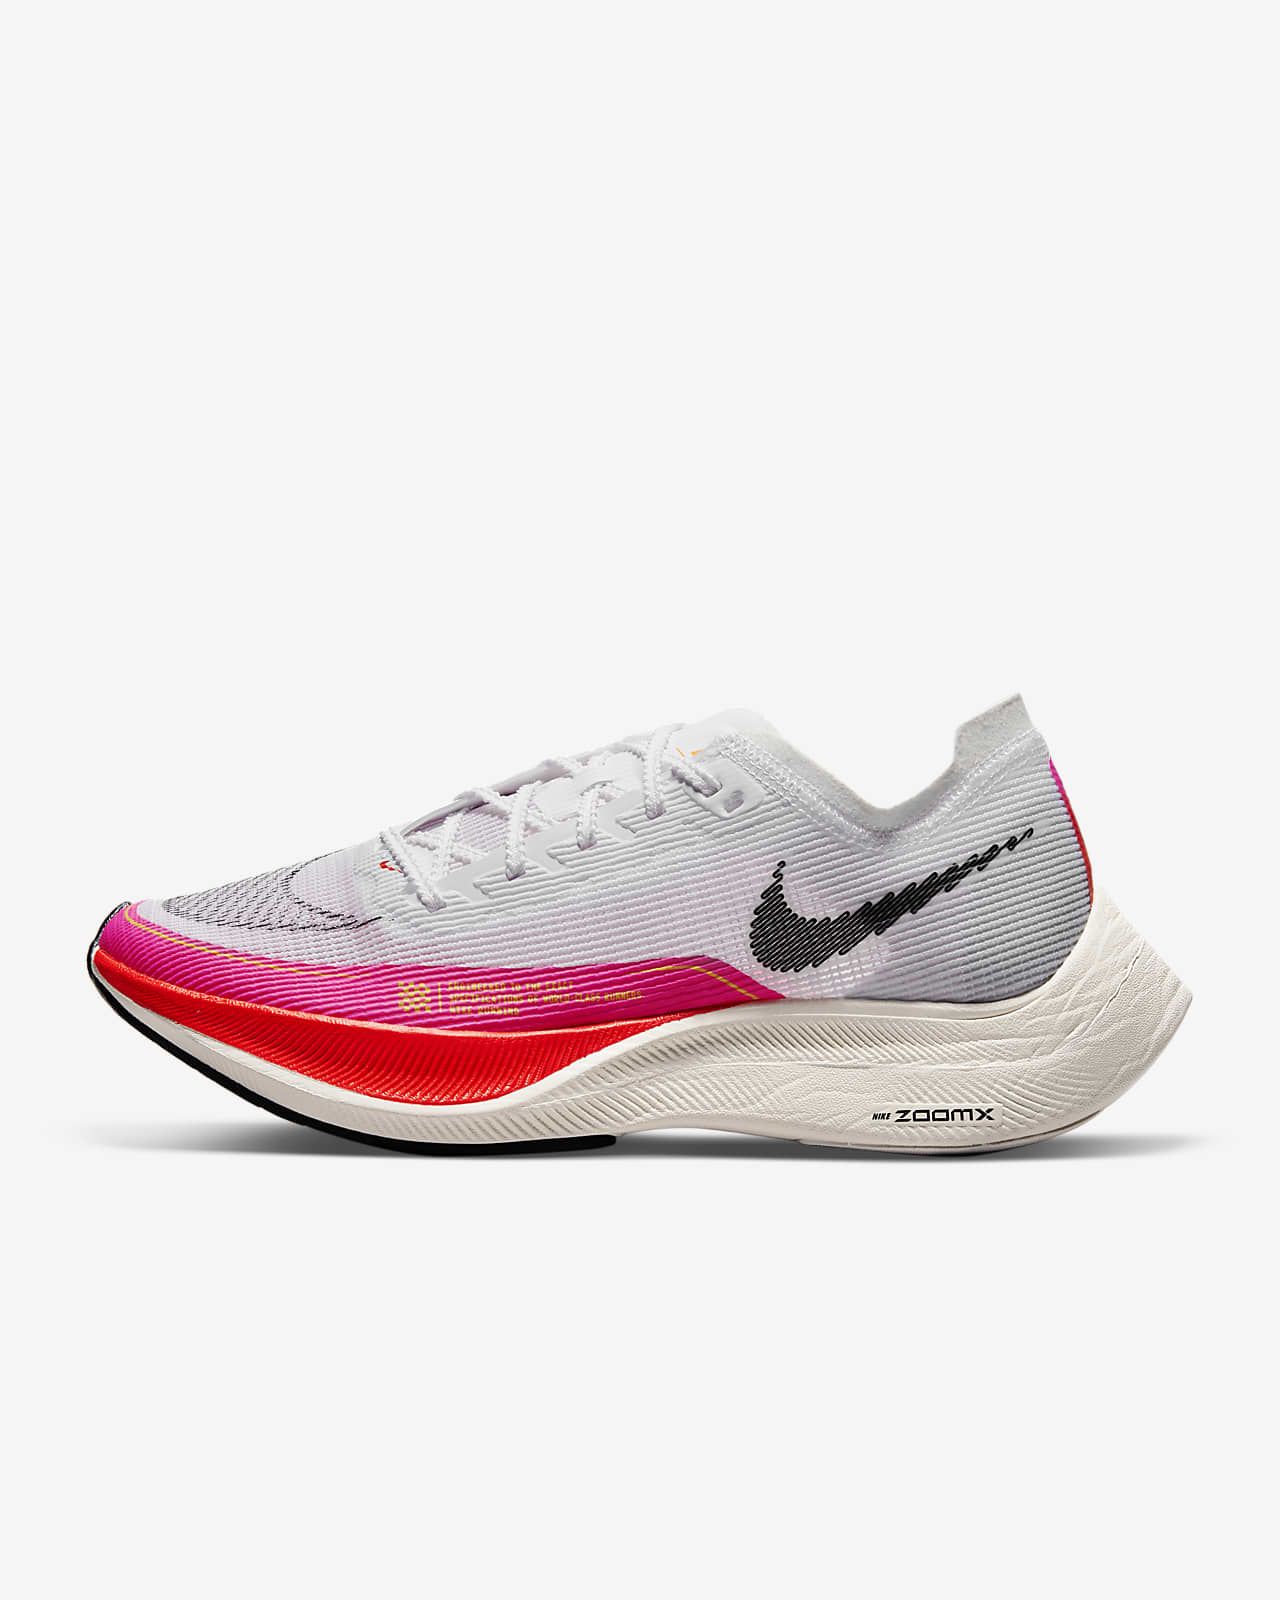 Nike ZoomX Vaporfly NEXT% 2Women's Road Racing Shoes$193.97$25022% off | Nike (US)